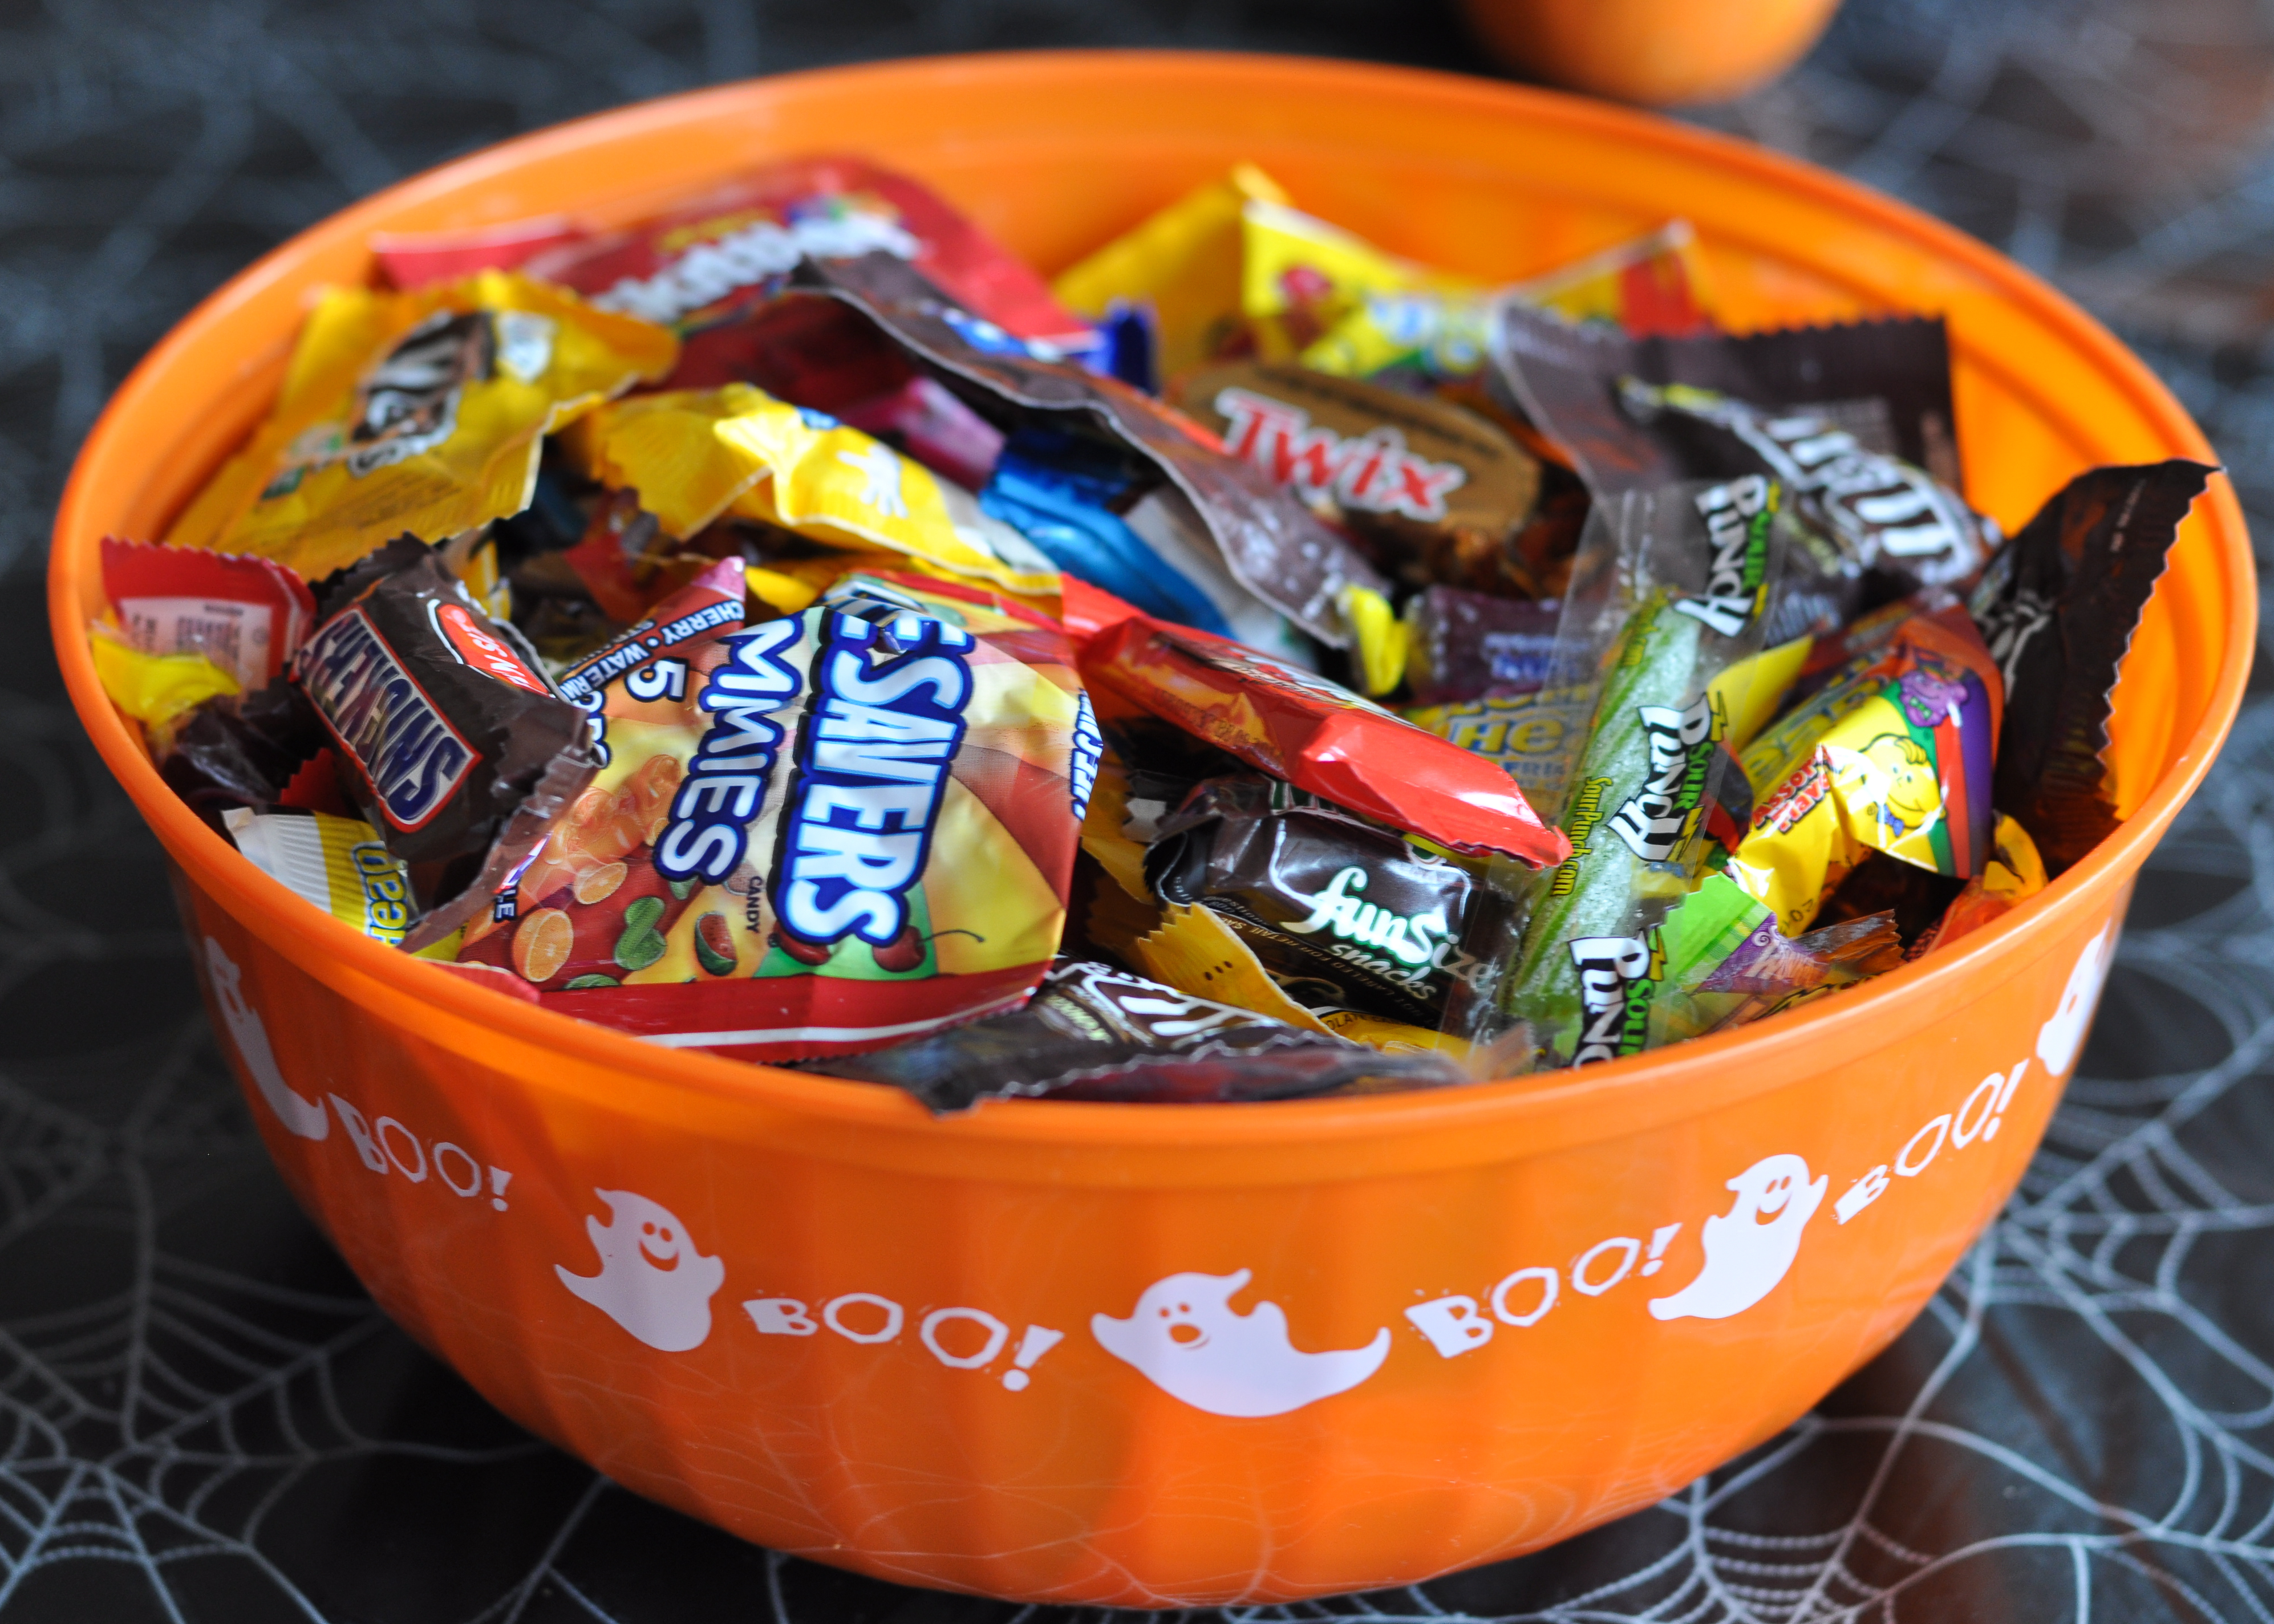 Candy may be trick-or-treat staples, but it can be dangerous for children with food allergies. (Photo: Nutritious Eats)